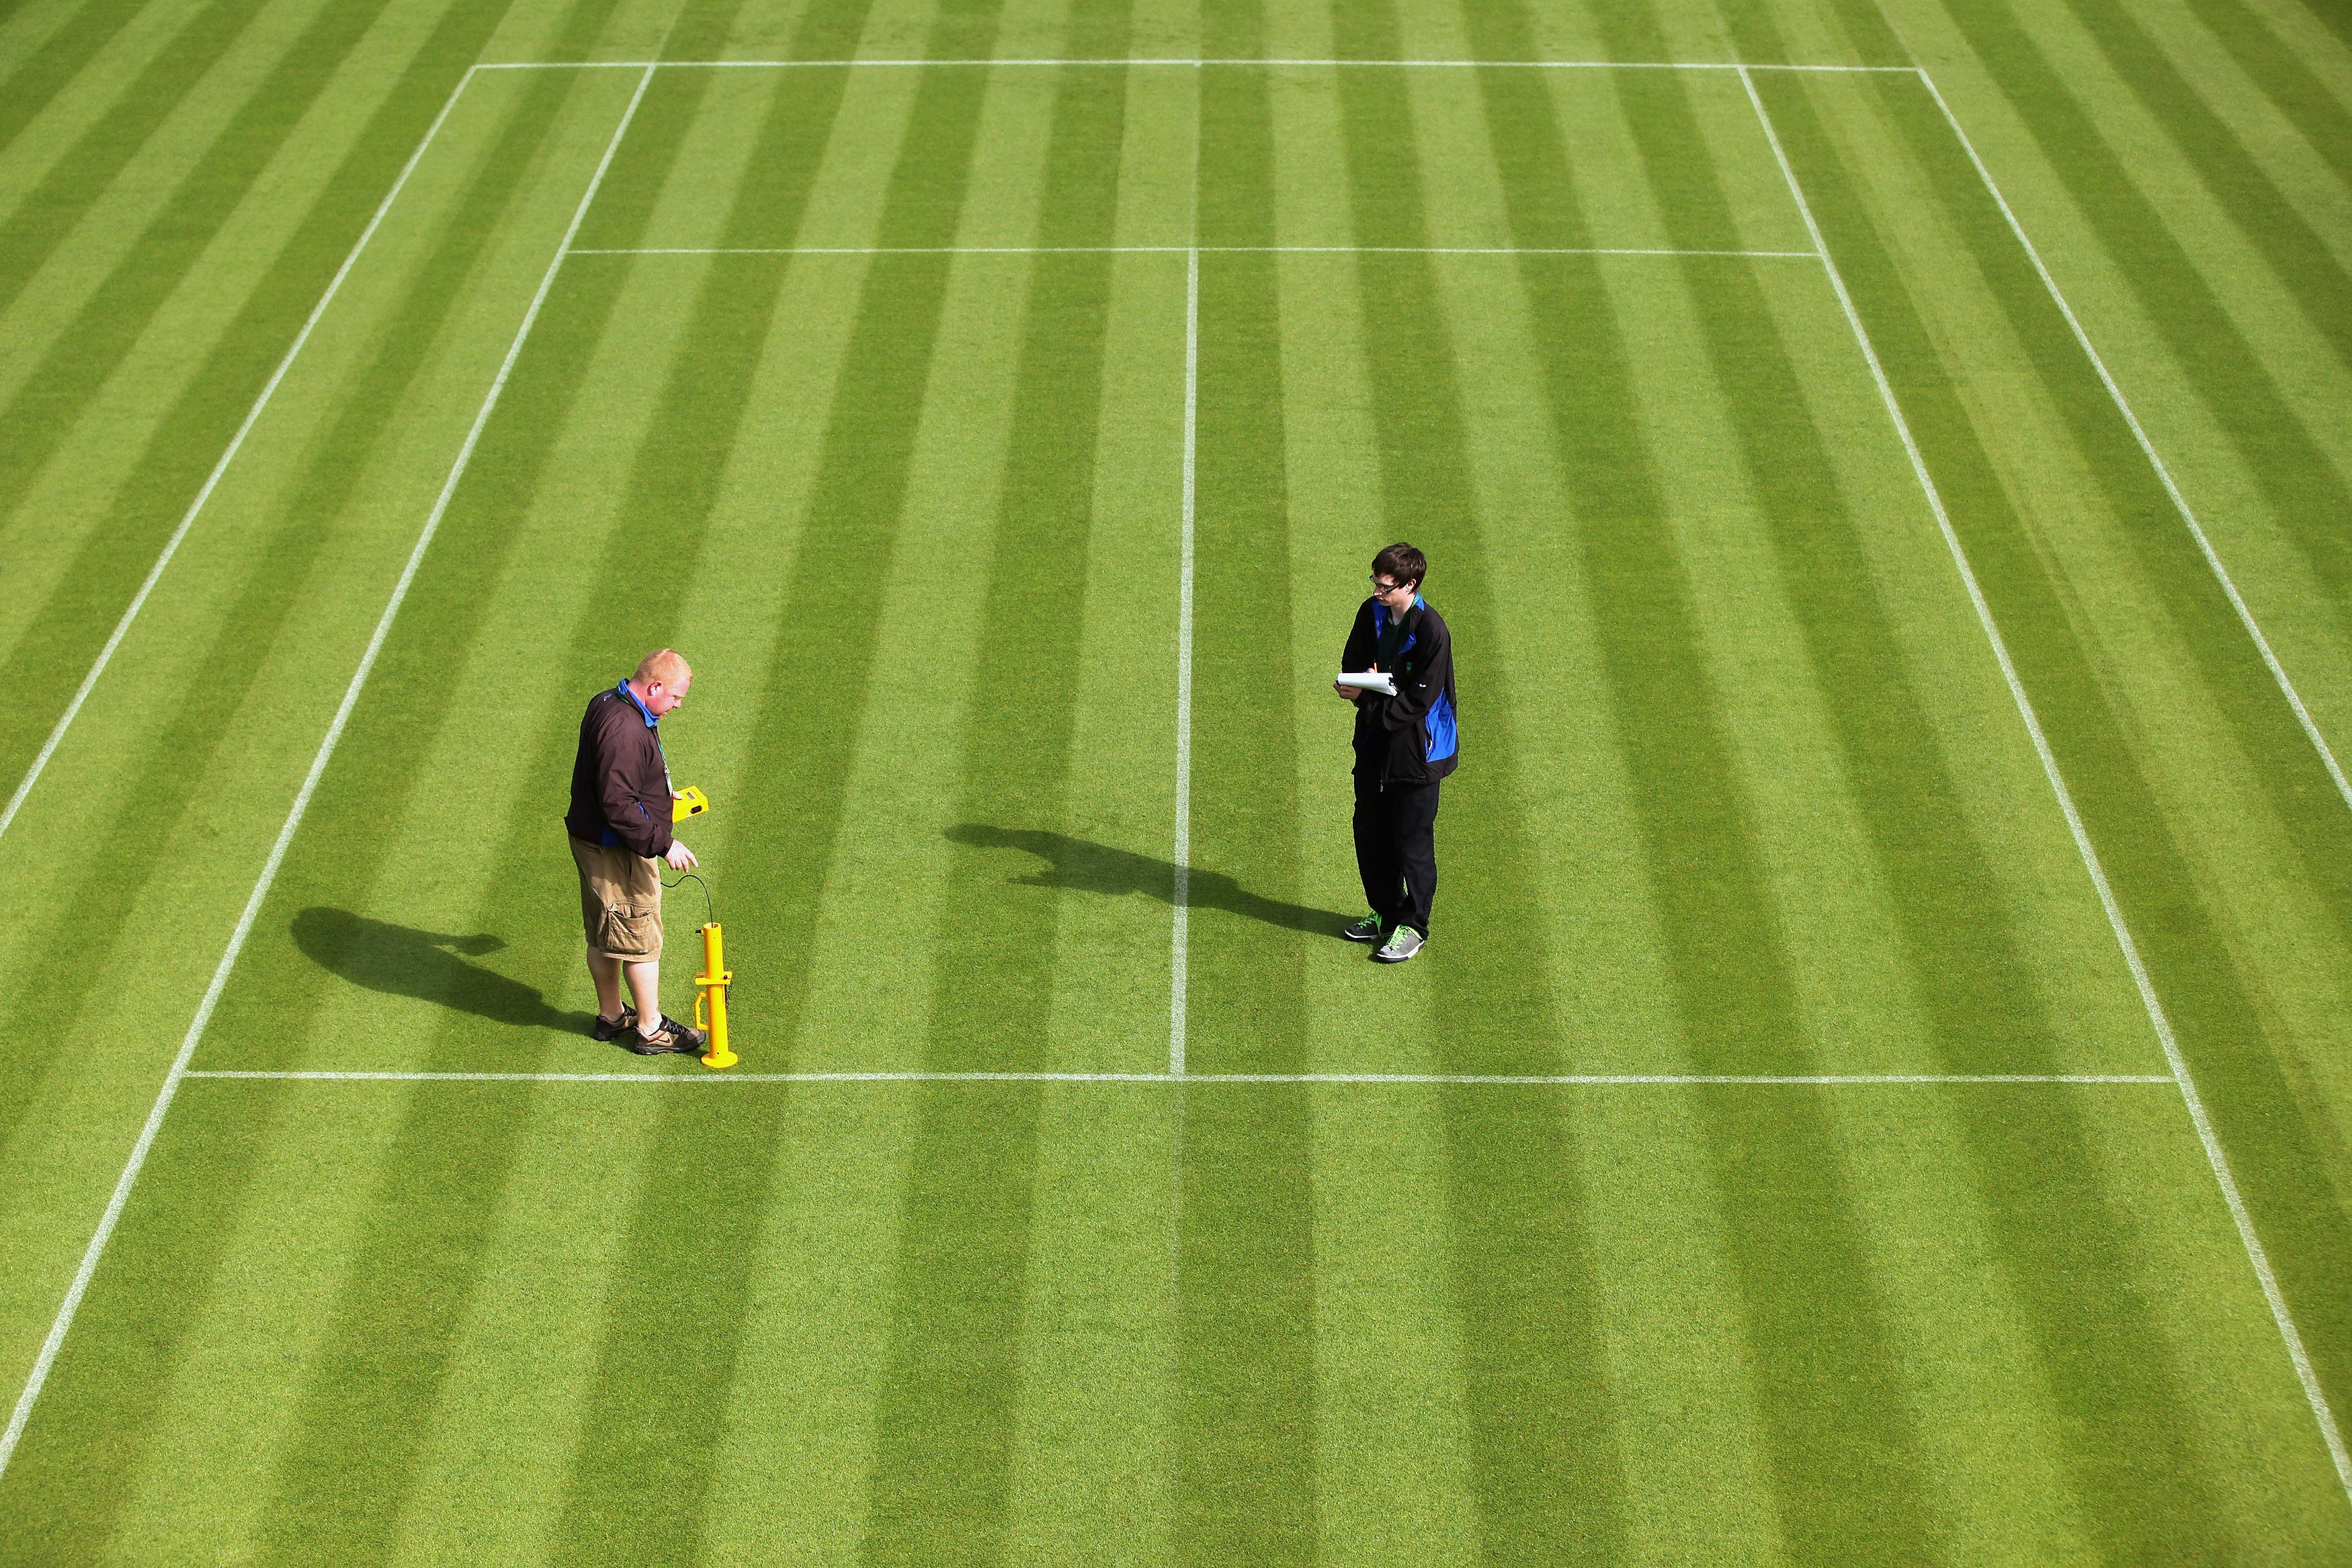 WIMBLEDON, ENGLAND - JUNE 18:  Groundstaff use an instrument to check the bounciness of the grass courts at the All England Lawn Tennis and Croquet Club ahead of the Wimbledon Lawn Tennis Championships on June 18, 2011 in London, England. The Championship